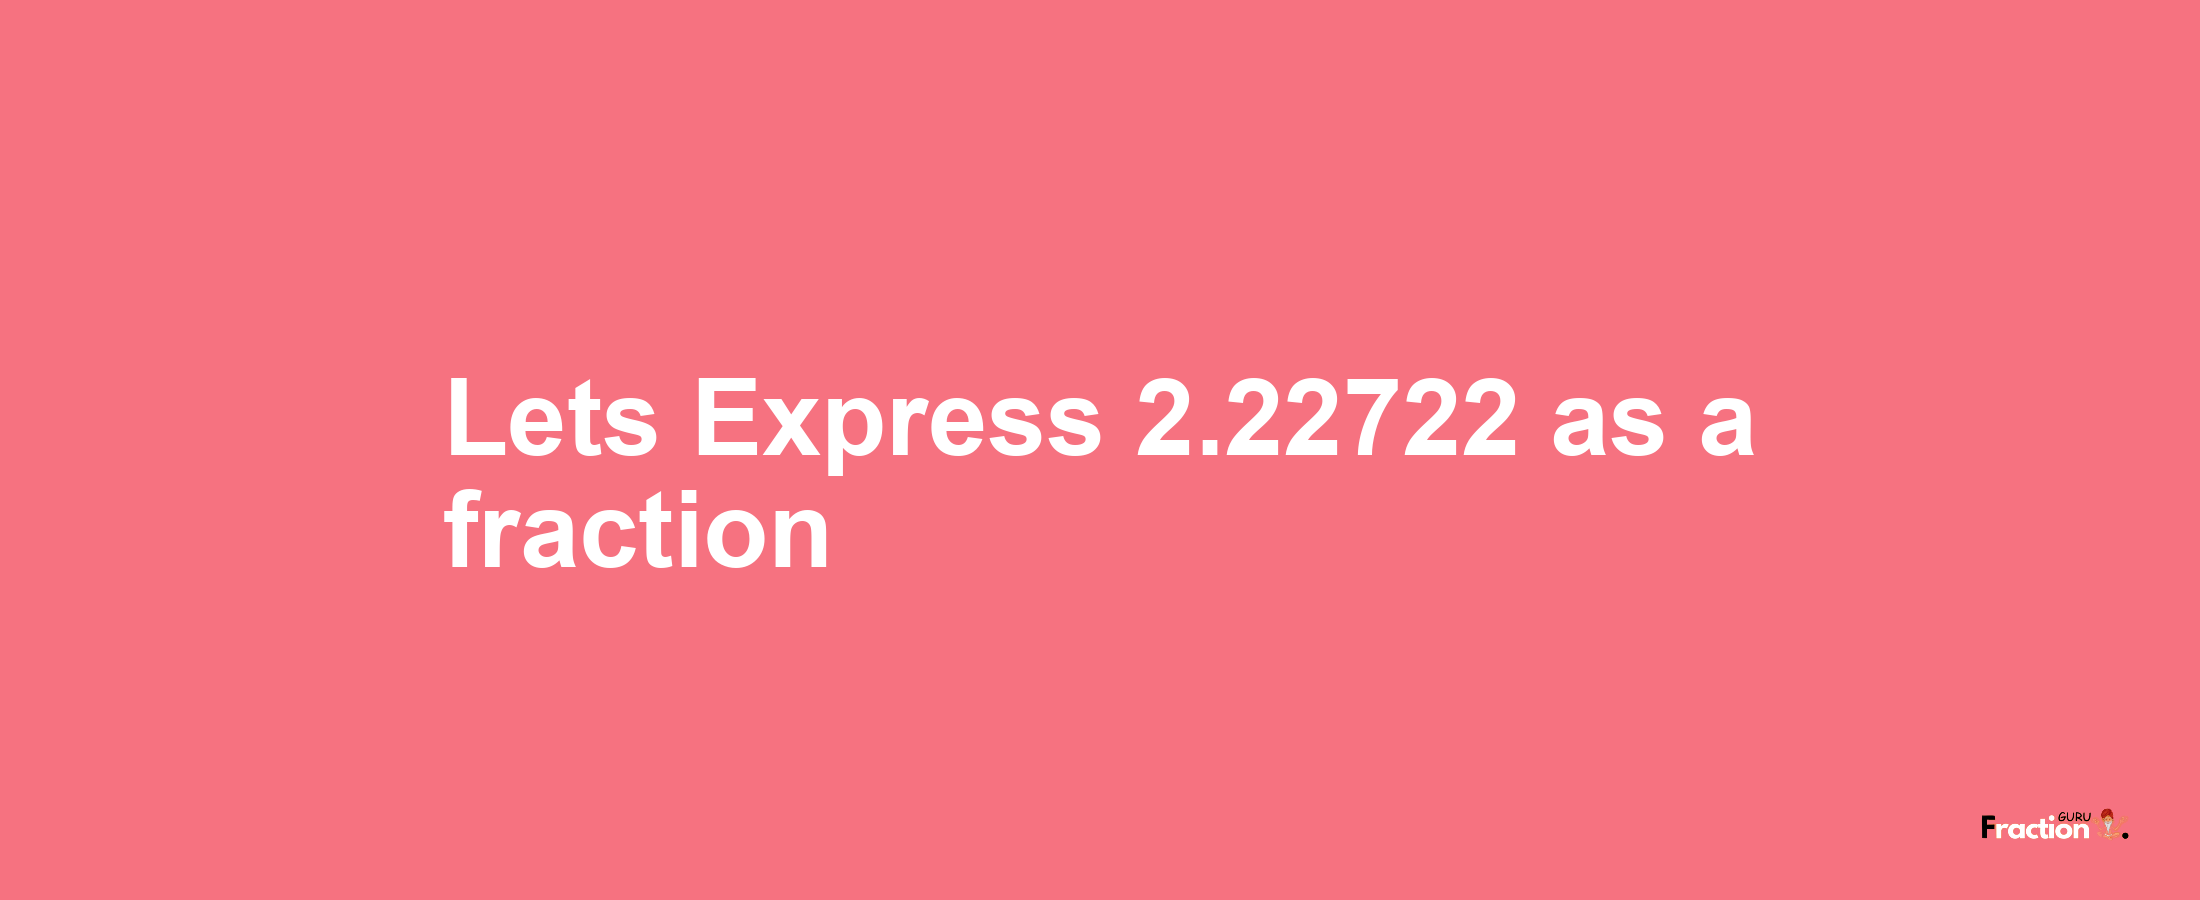 Lets Express 2.22722 as afraction